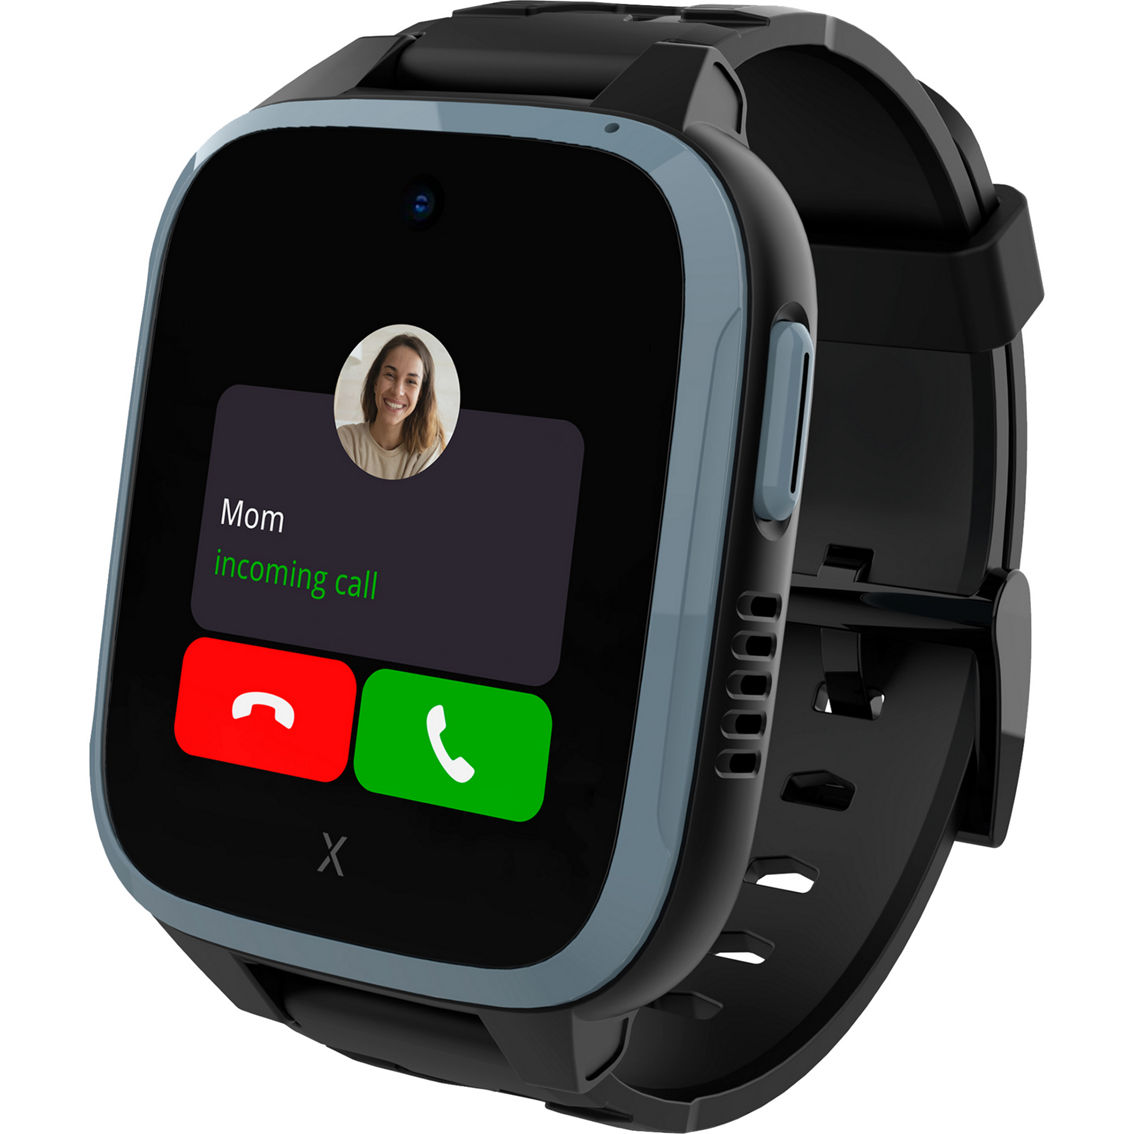 Xplora XGO3 Black Kids Smart Watch Cell Phone with GPS and SIM Card Included - Image 6 of 9